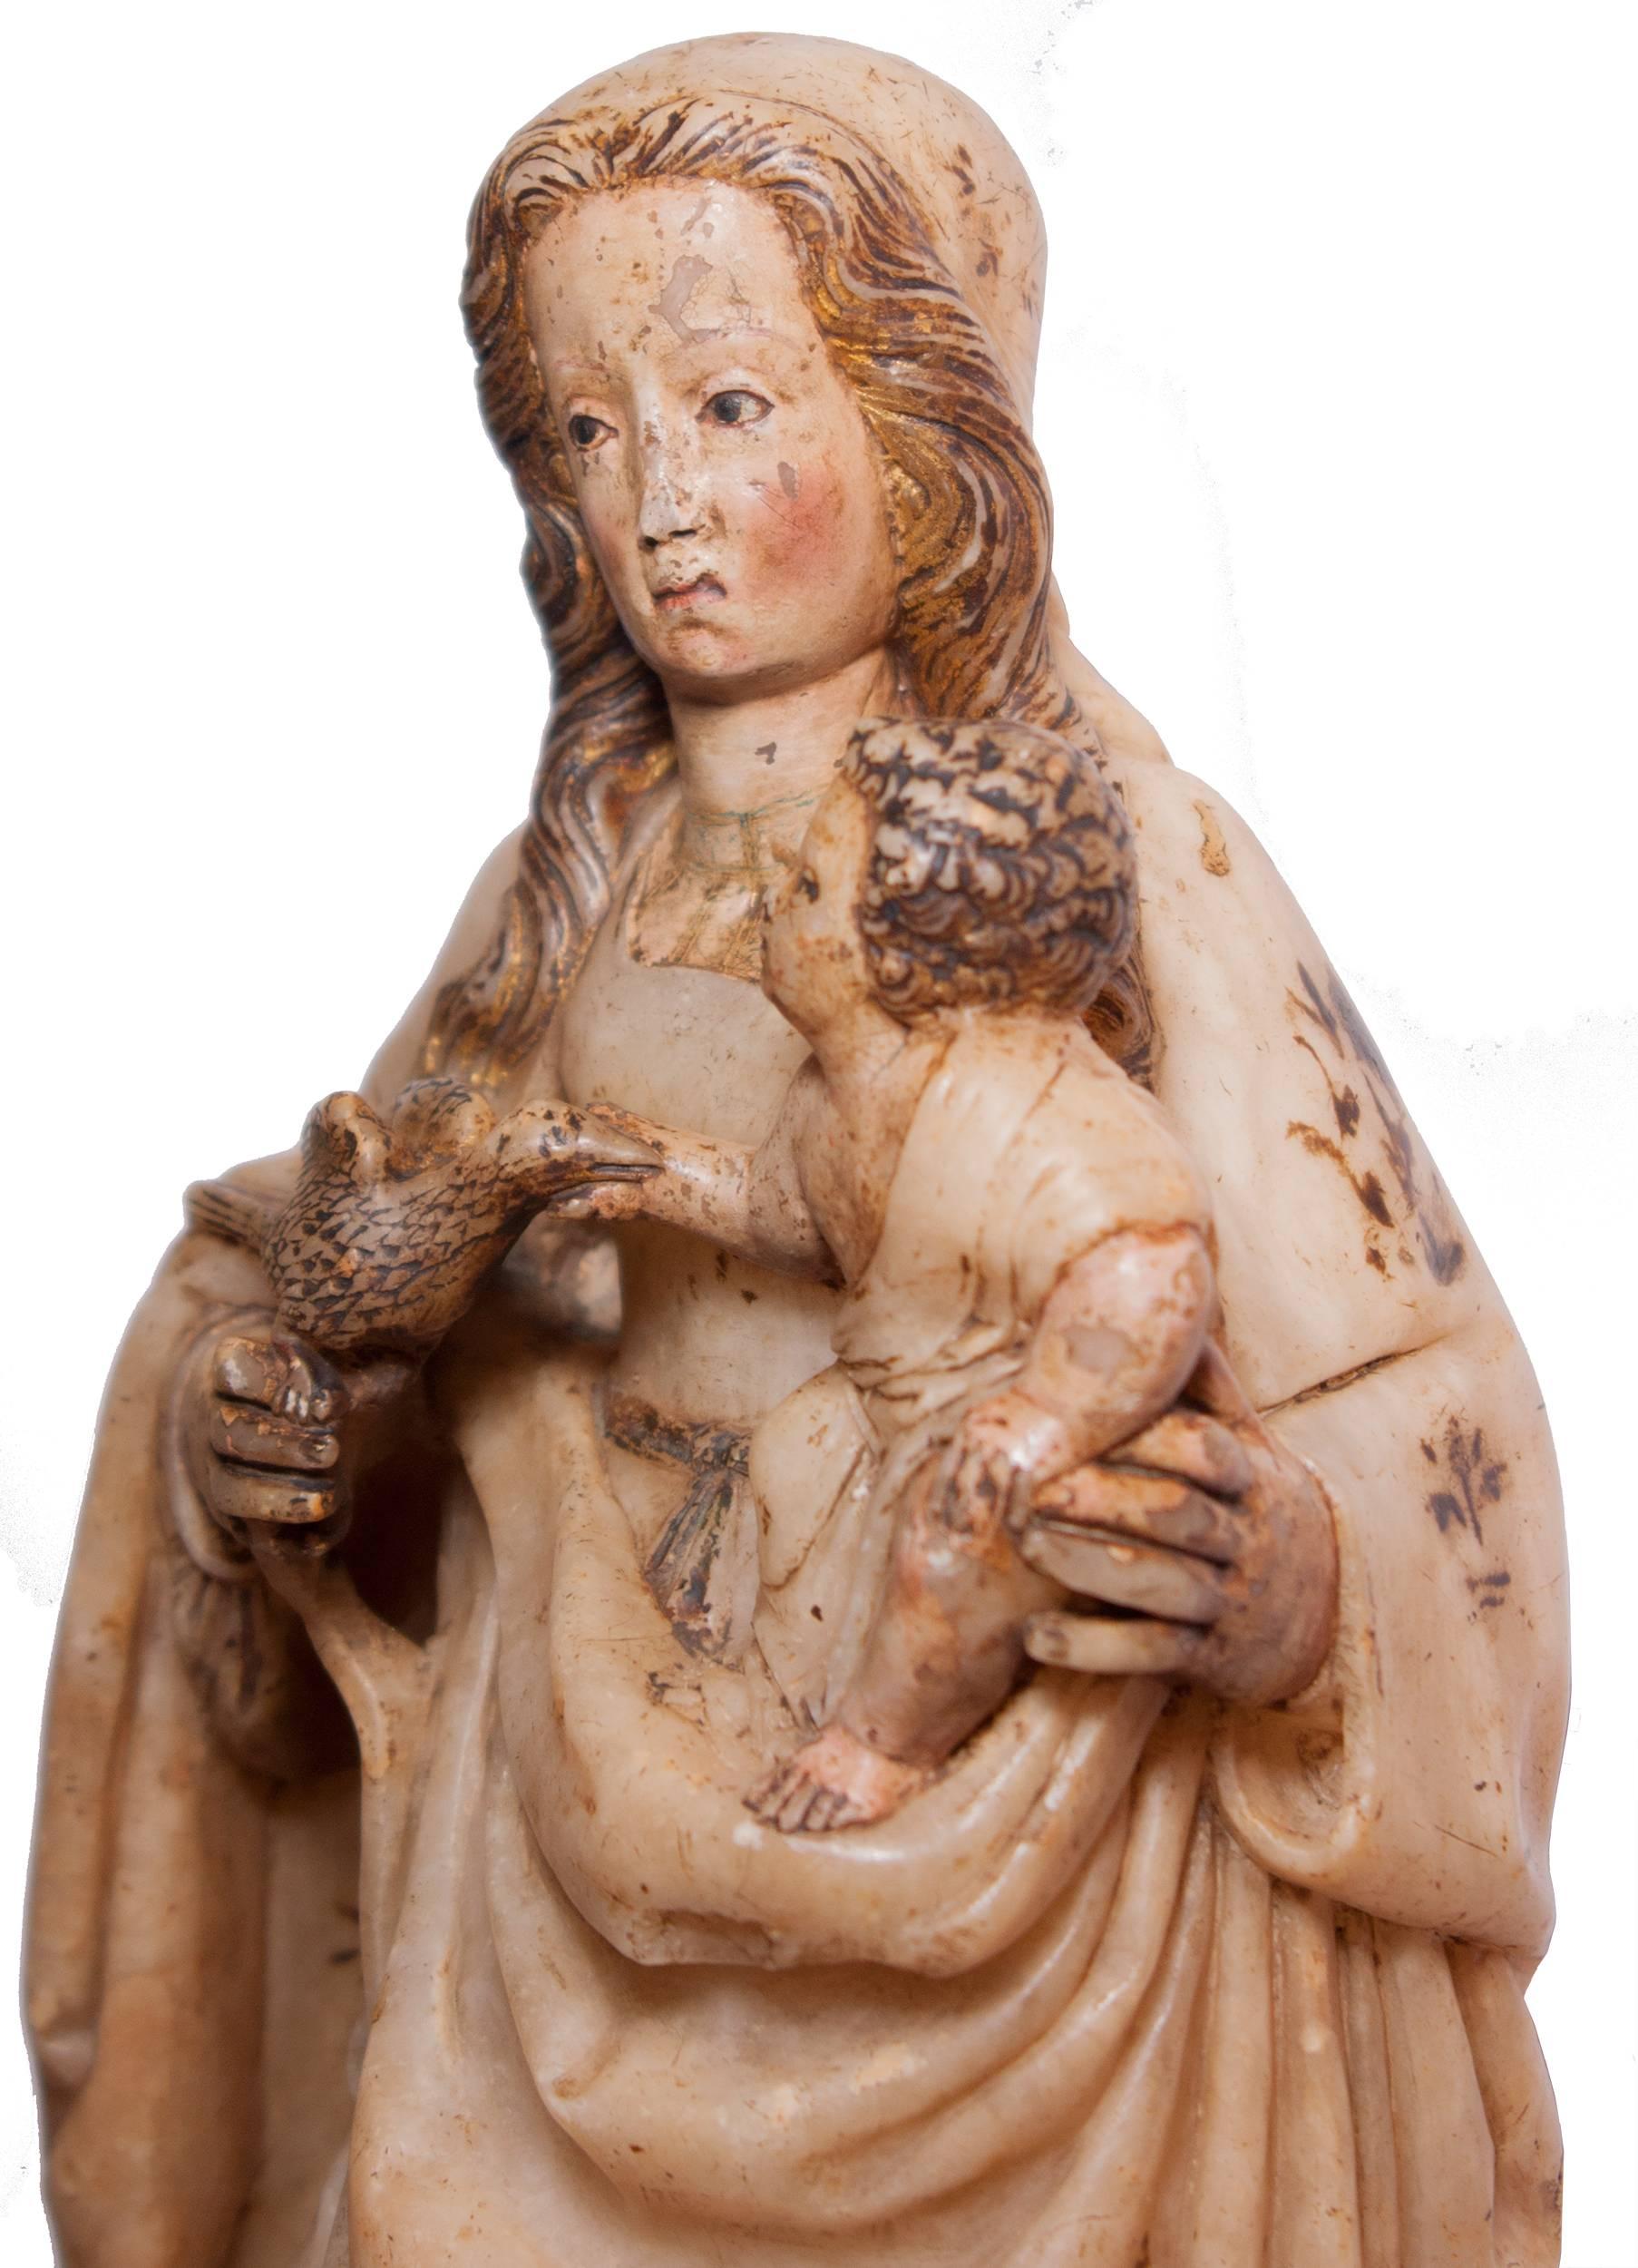 Virgin and Child, in alabaster embellished with gold and pigments, circa 1500, Burgos or Aragonese school.

This beautiful Madonna with Child illustrates the passage of the Spanish sculpture from Gothic to Renaissance, under the double influence of